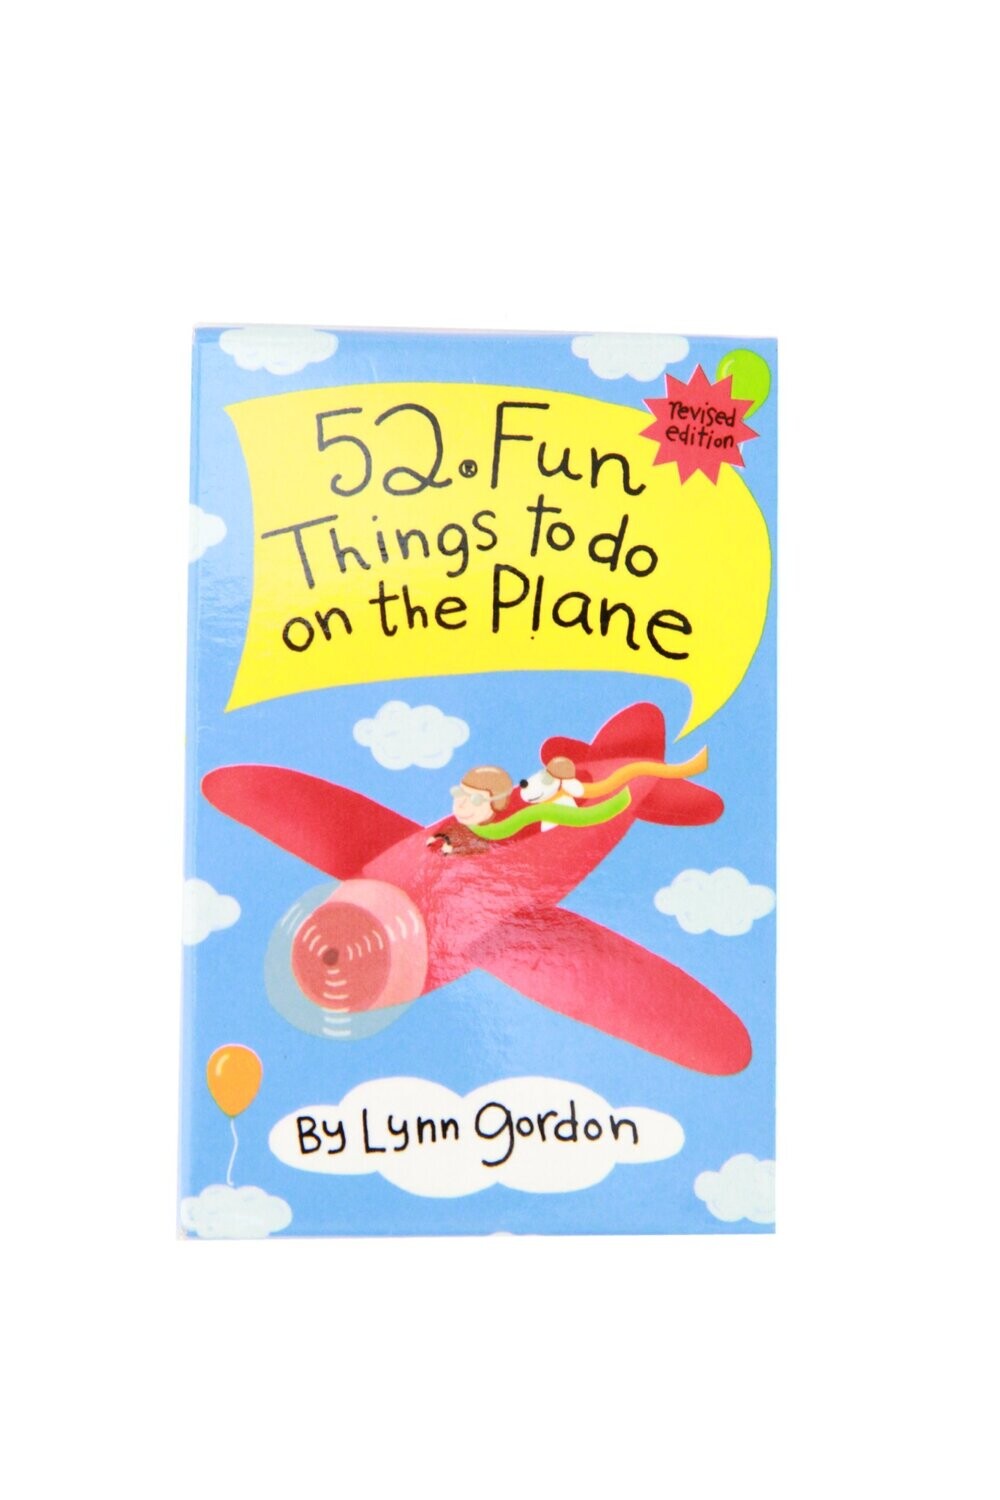 52 Fun Things to do on the Plane 63728